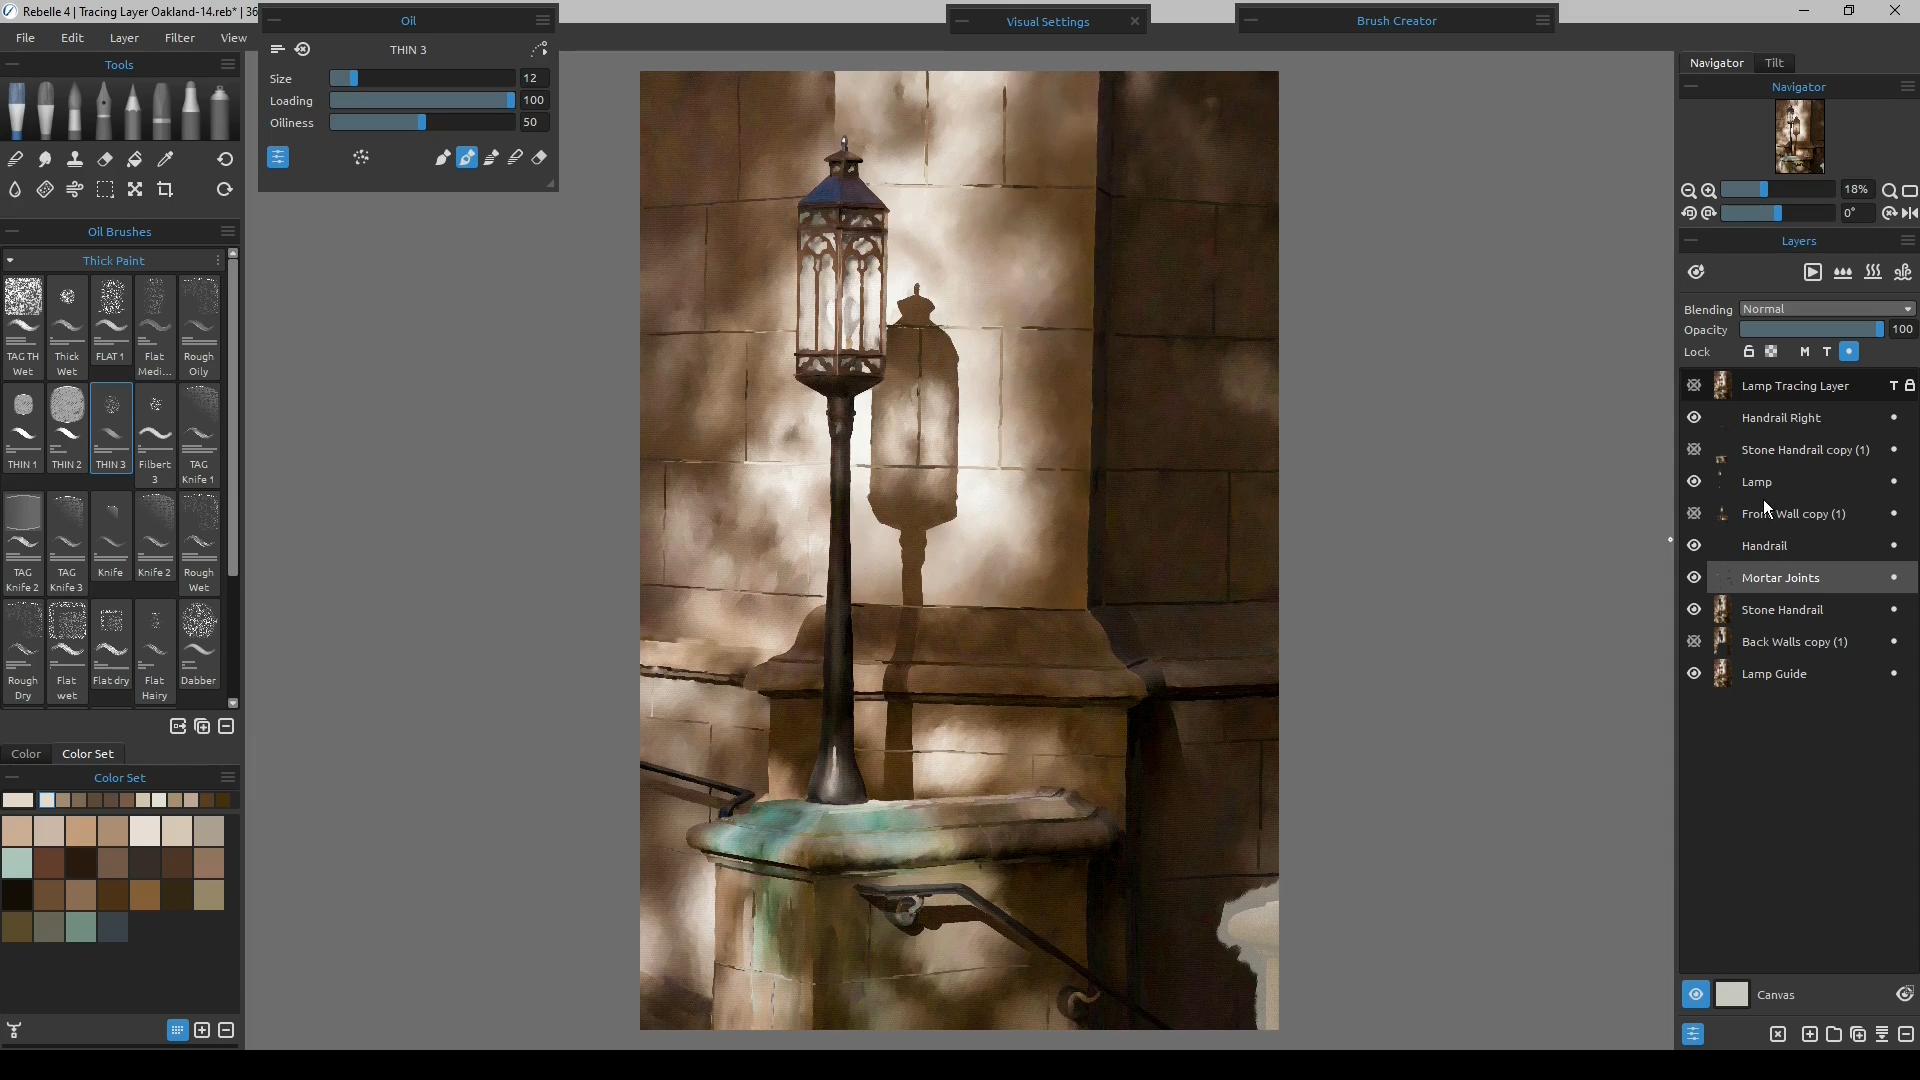 How to Trace a Photo in Rebelle 4: Ornamental Lamp